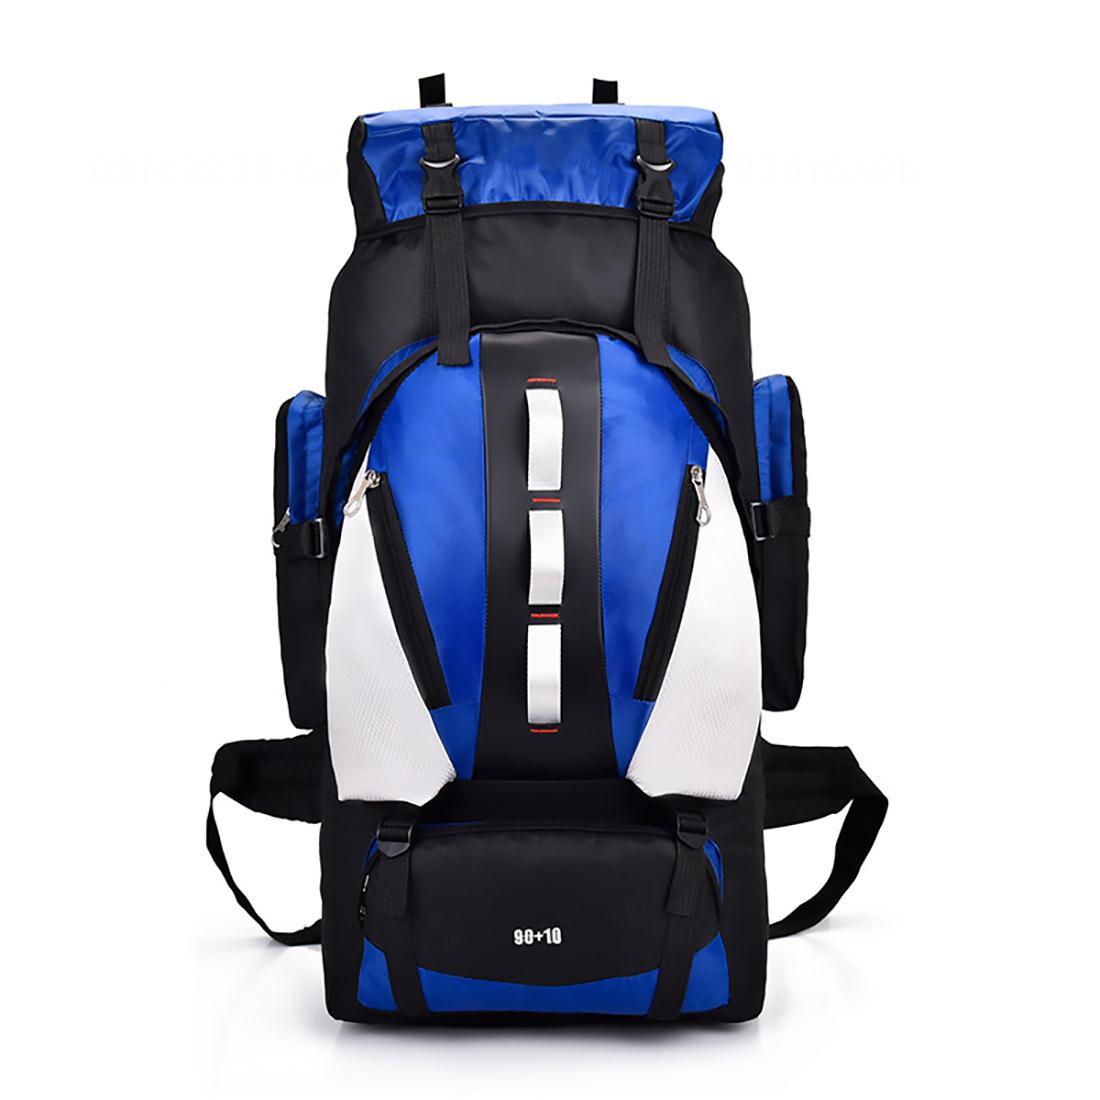 Hiking Backpack - 90L Hiking Backpack Waterproof Internal Frame Backpack Large Hiking Mountaineering Backpack, Free Rain Cover for Men and Women Outdoors.(Blue) - image 1 of 9